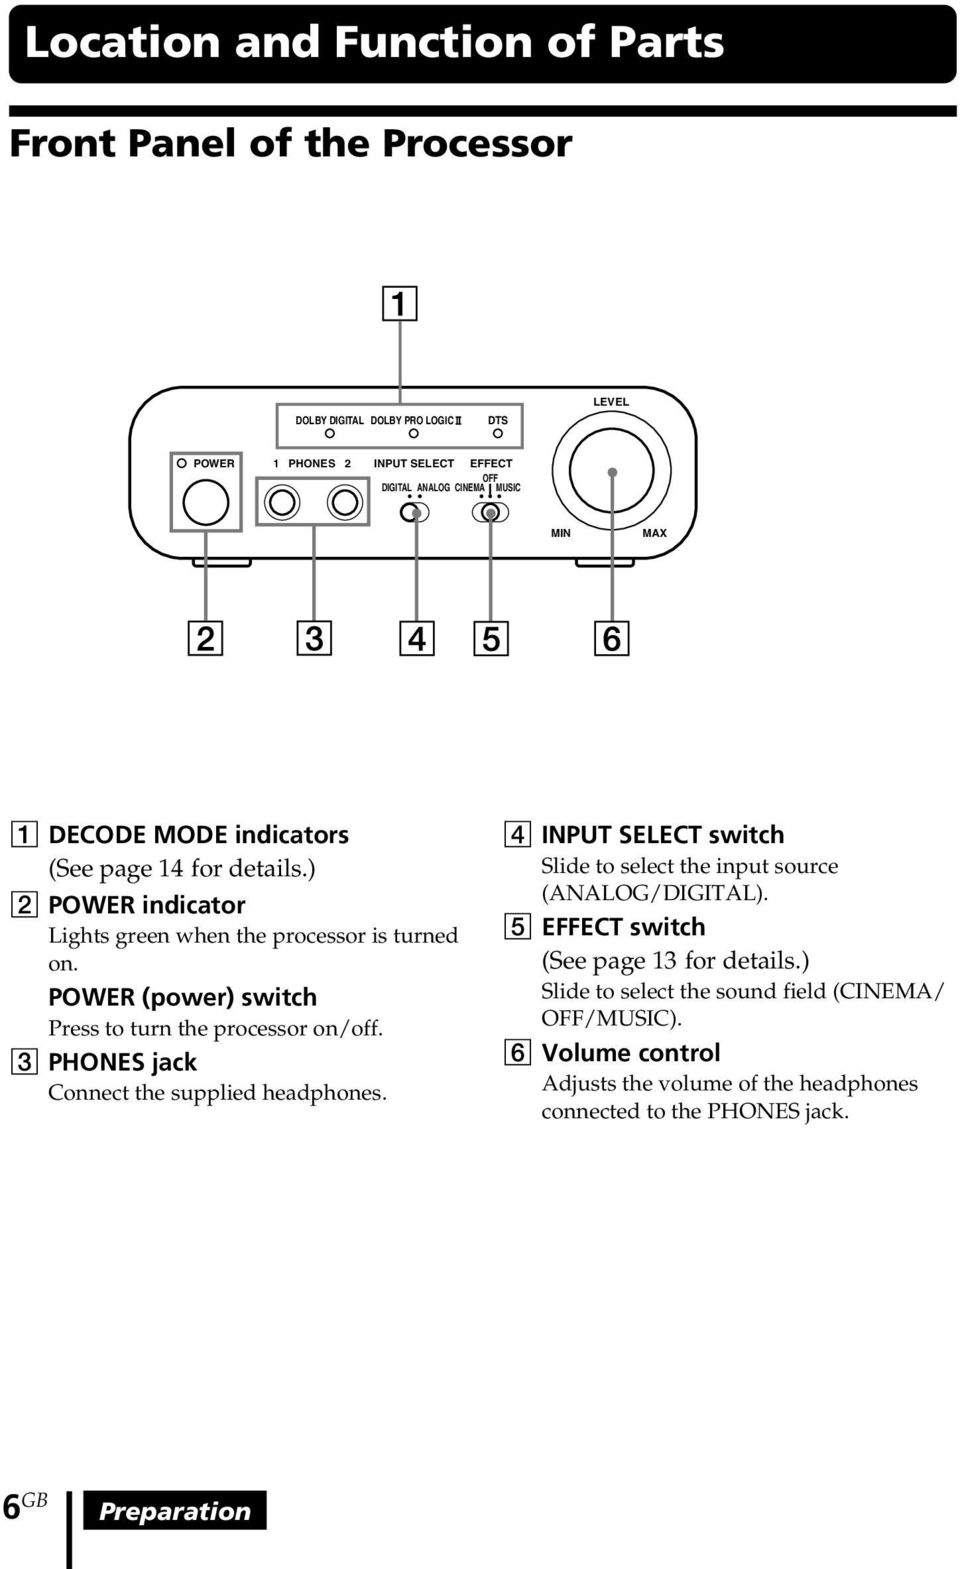 POWER (power) switch Press to turn the processor on/off. 3 PHONES jack Connect the supplied headphones.